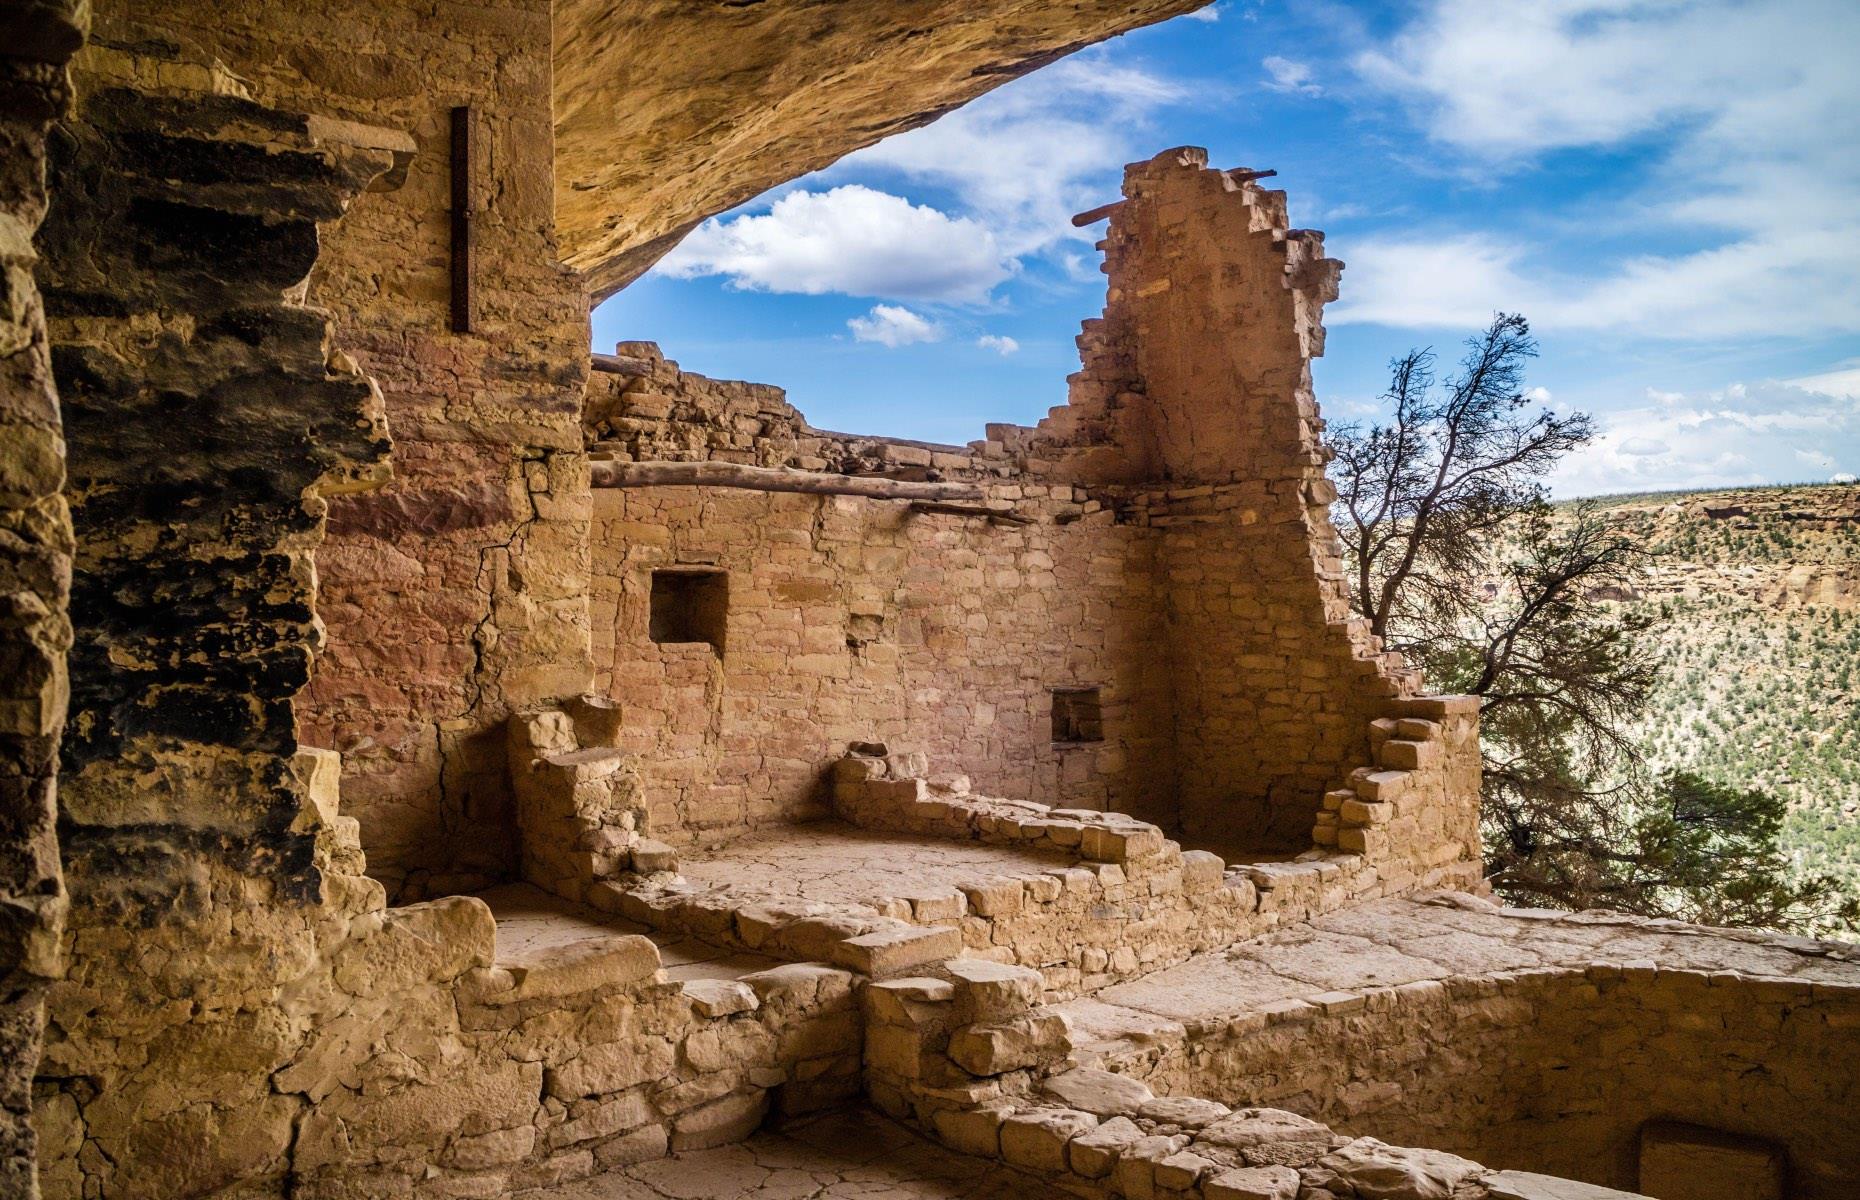 <p>Surprisingly, although the Cliff Palace is the park's biggest dwelling with 150 rooms, it's the modestly sized Balcony House (pictured) with just 38 rooms that's the most exciting to tour. Seeing it involves climbing a 32-foot-high (9.7m) wooden ladder and crawling through an 18-inch-wide tunnel. </p>  <p><a href="https://www.loveexploring.com/galleries/81788/the-best-views-in-the-world-but-only-for-the-brave?page=1"><strong>These are the world's best views, but only for the brave</strong></a></p>